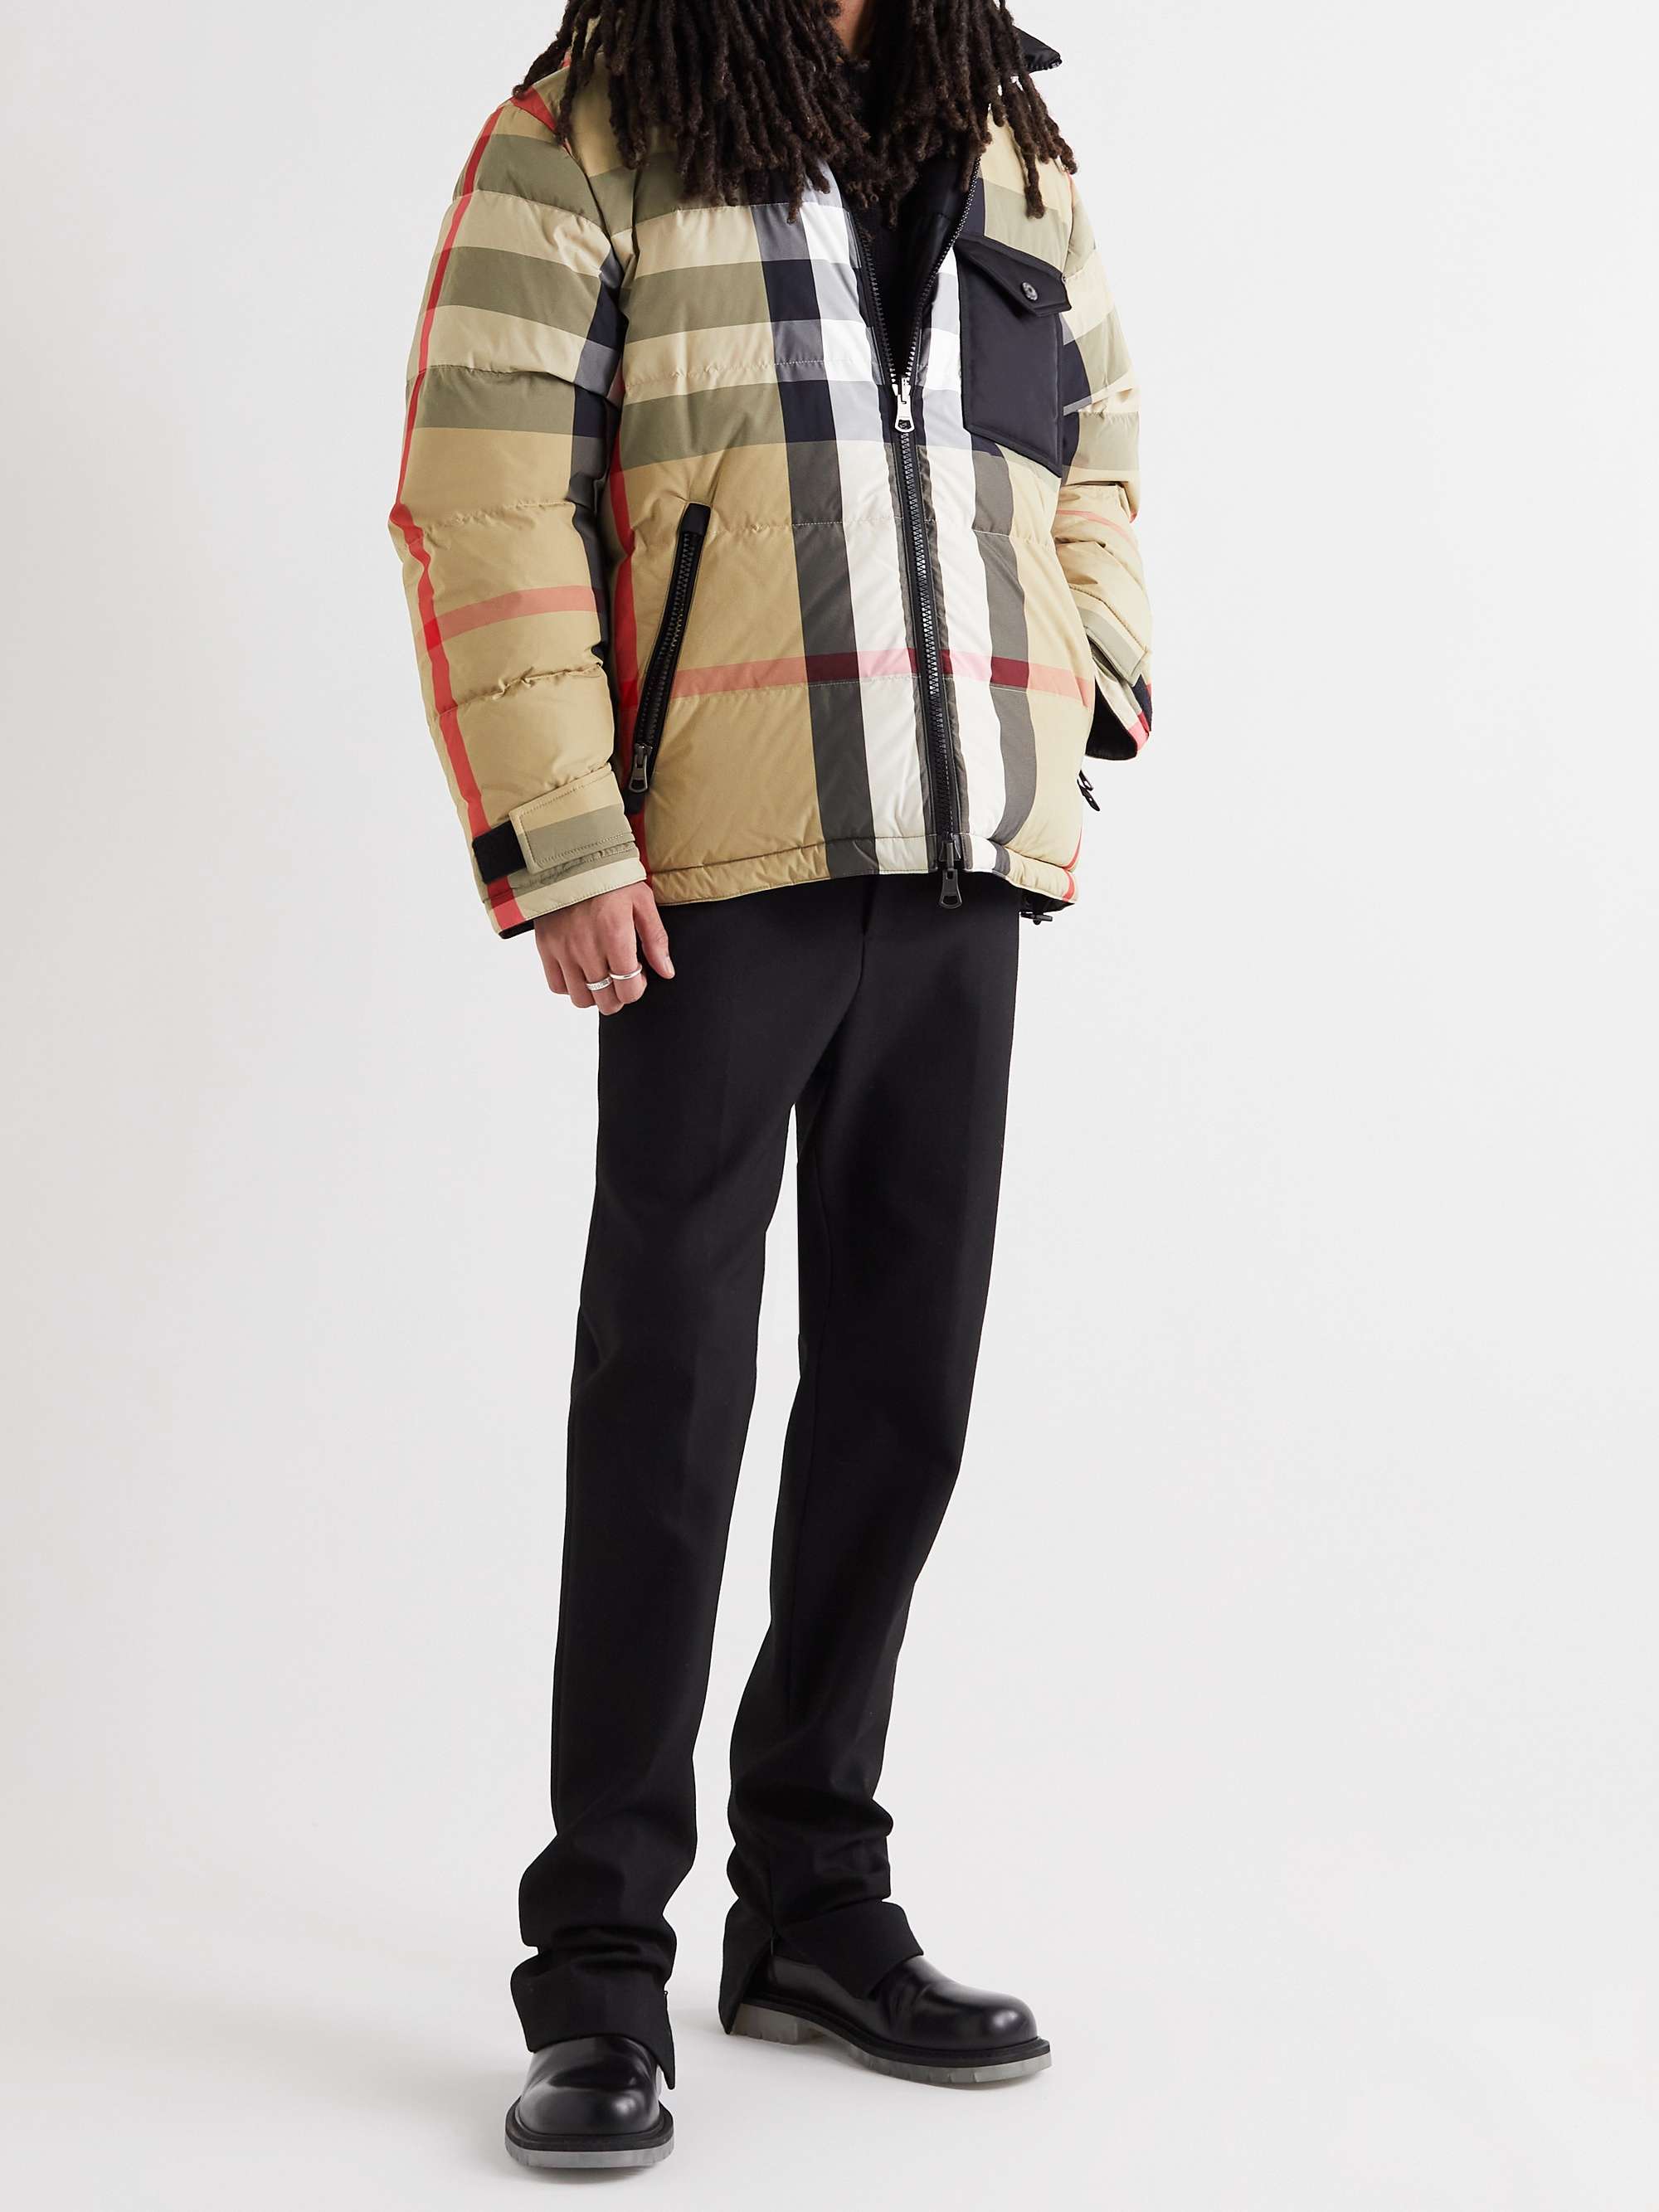 BURBERRY Reversible Checked Quilted Shell Down Hooded Jacket | MR PORTER